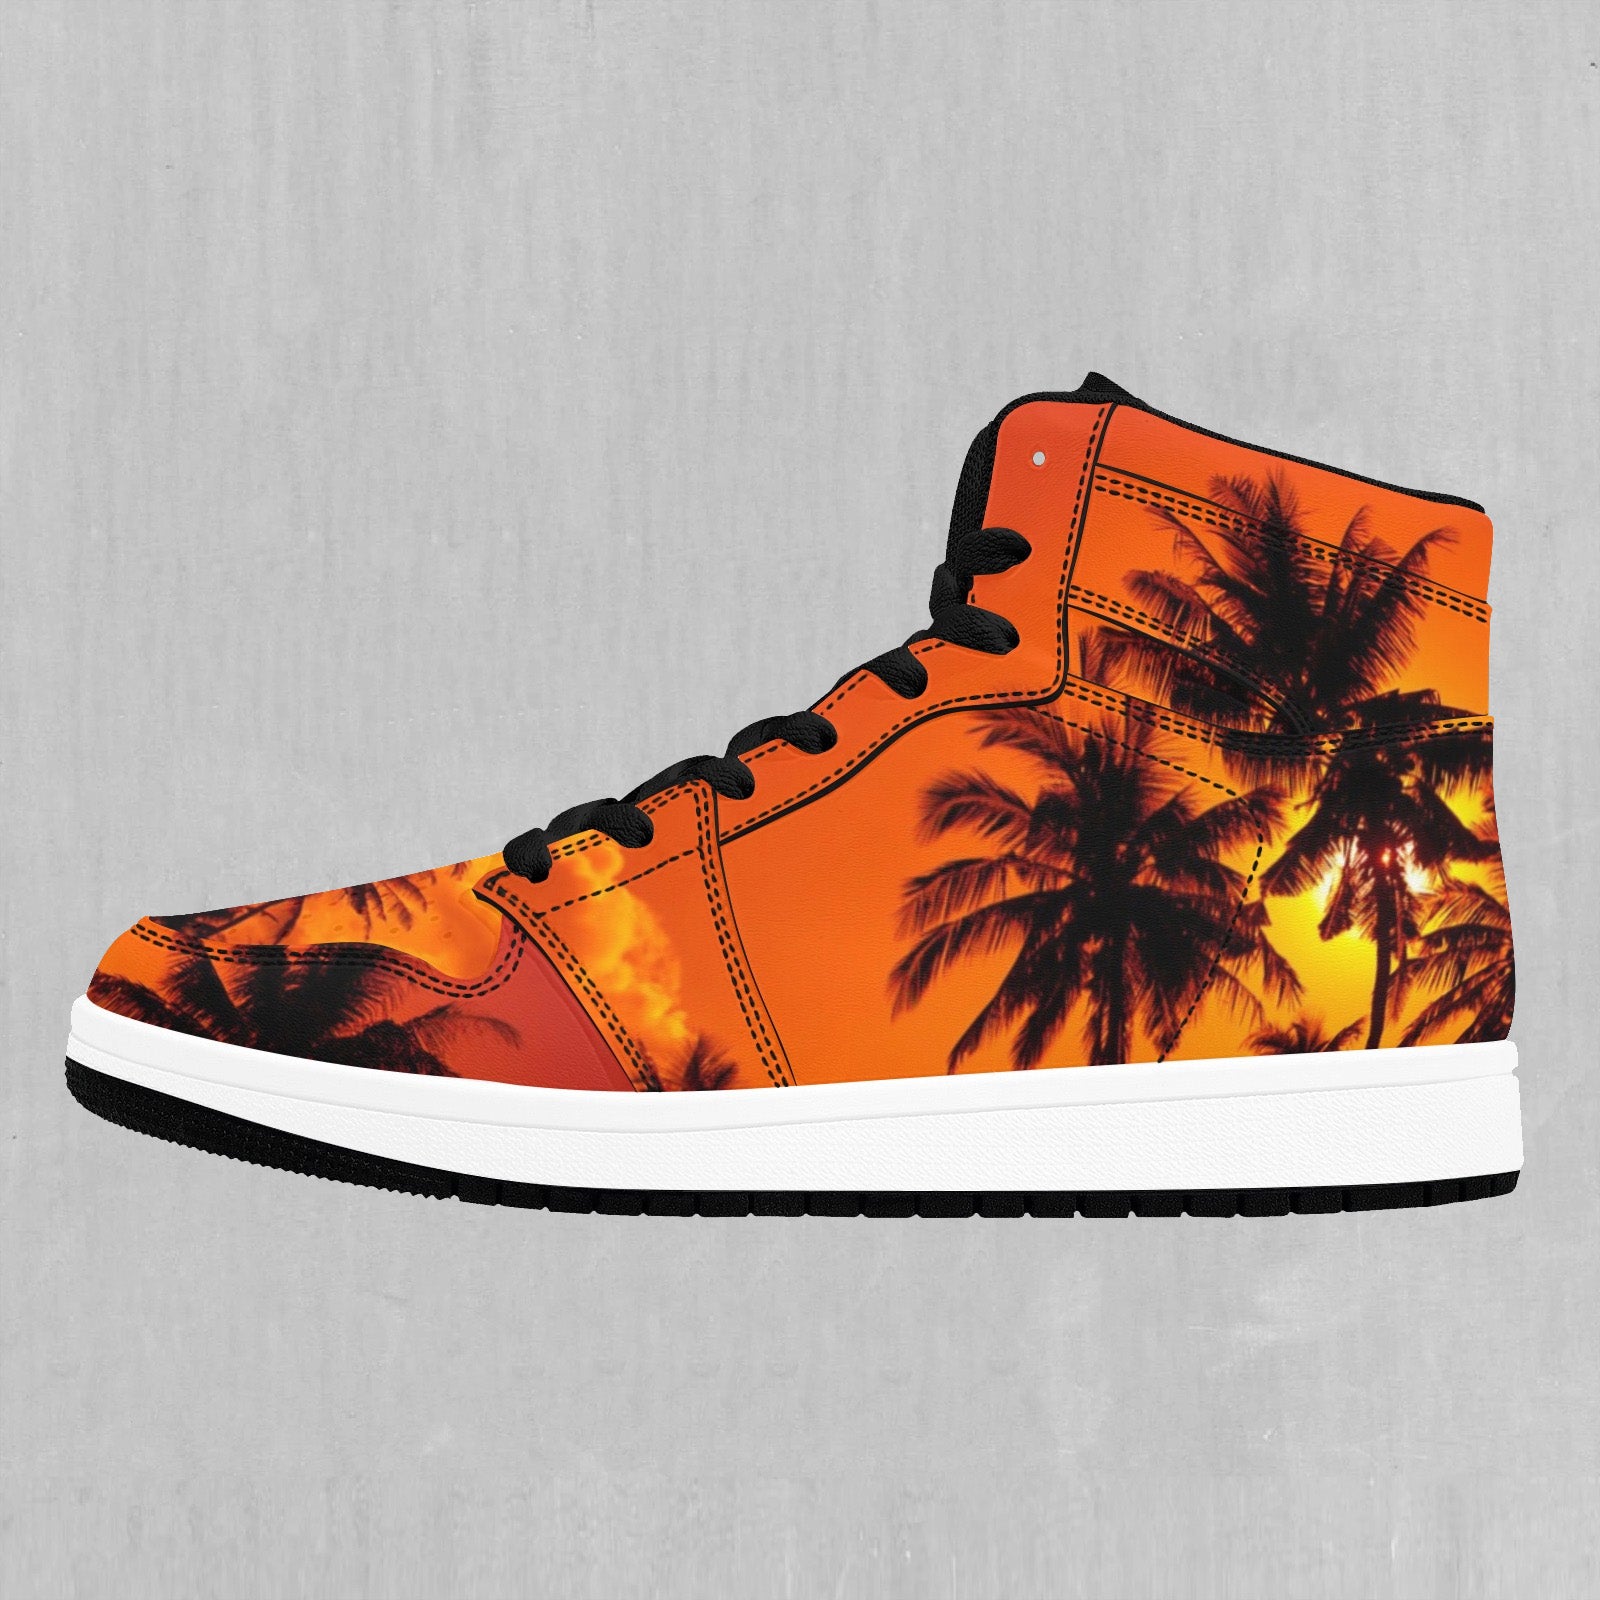 Lush Sunset High Top Sneakers